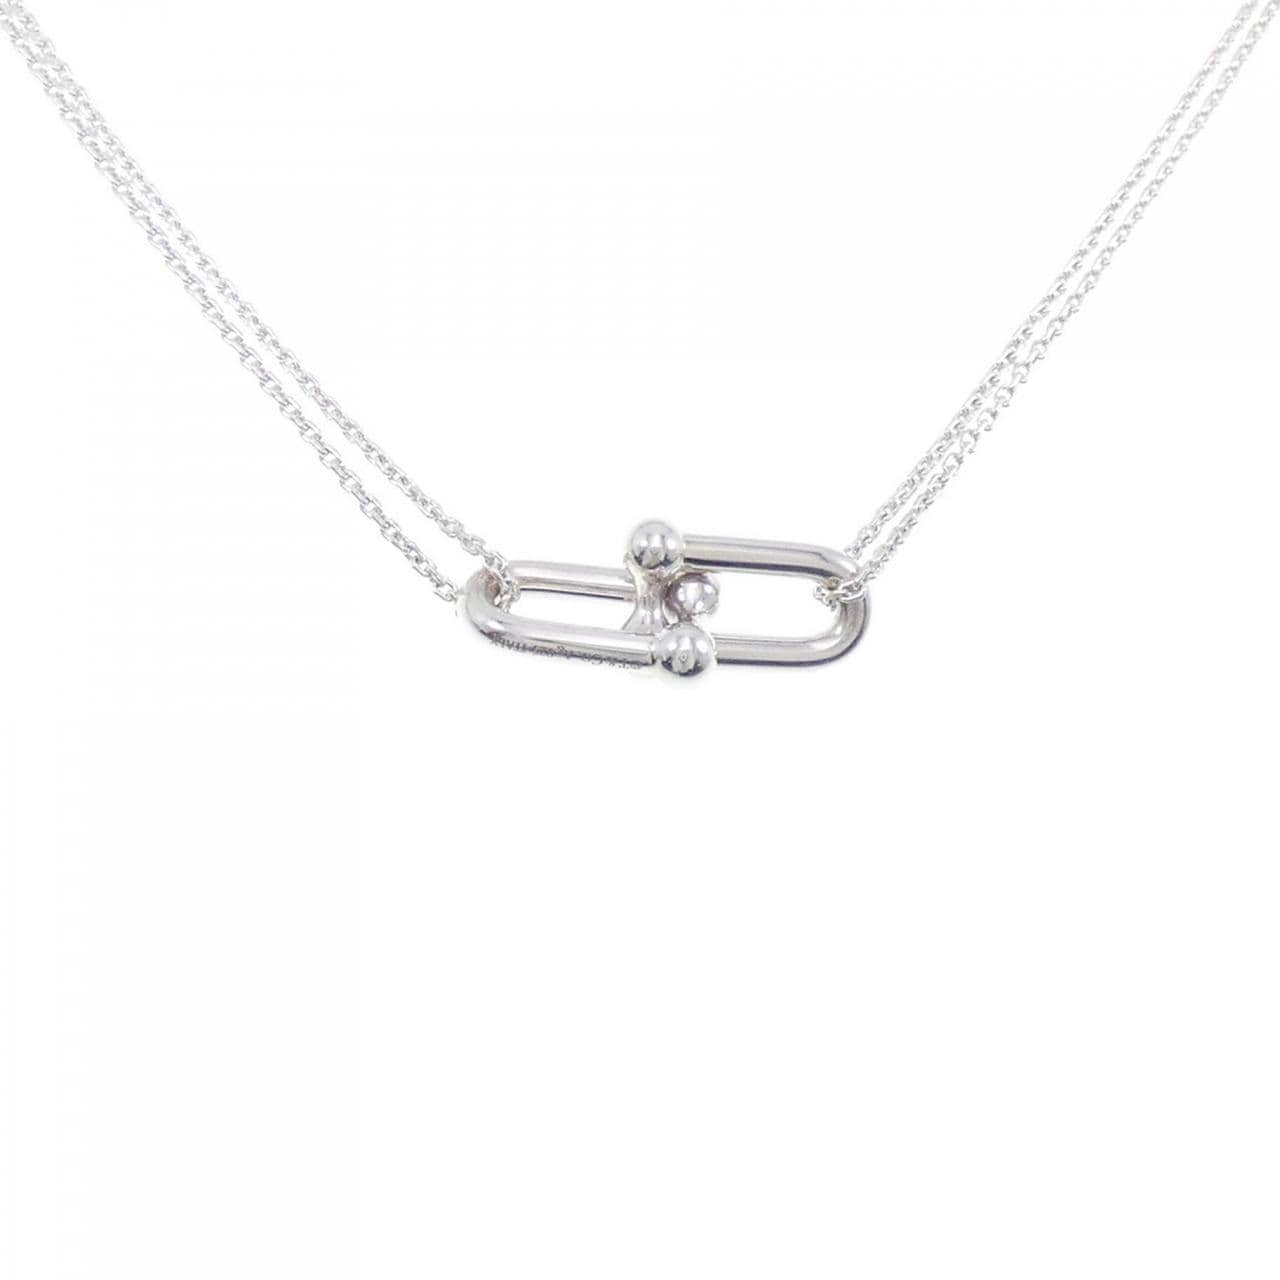 [BRAND NEW] TIFFANY Double Link Necklace